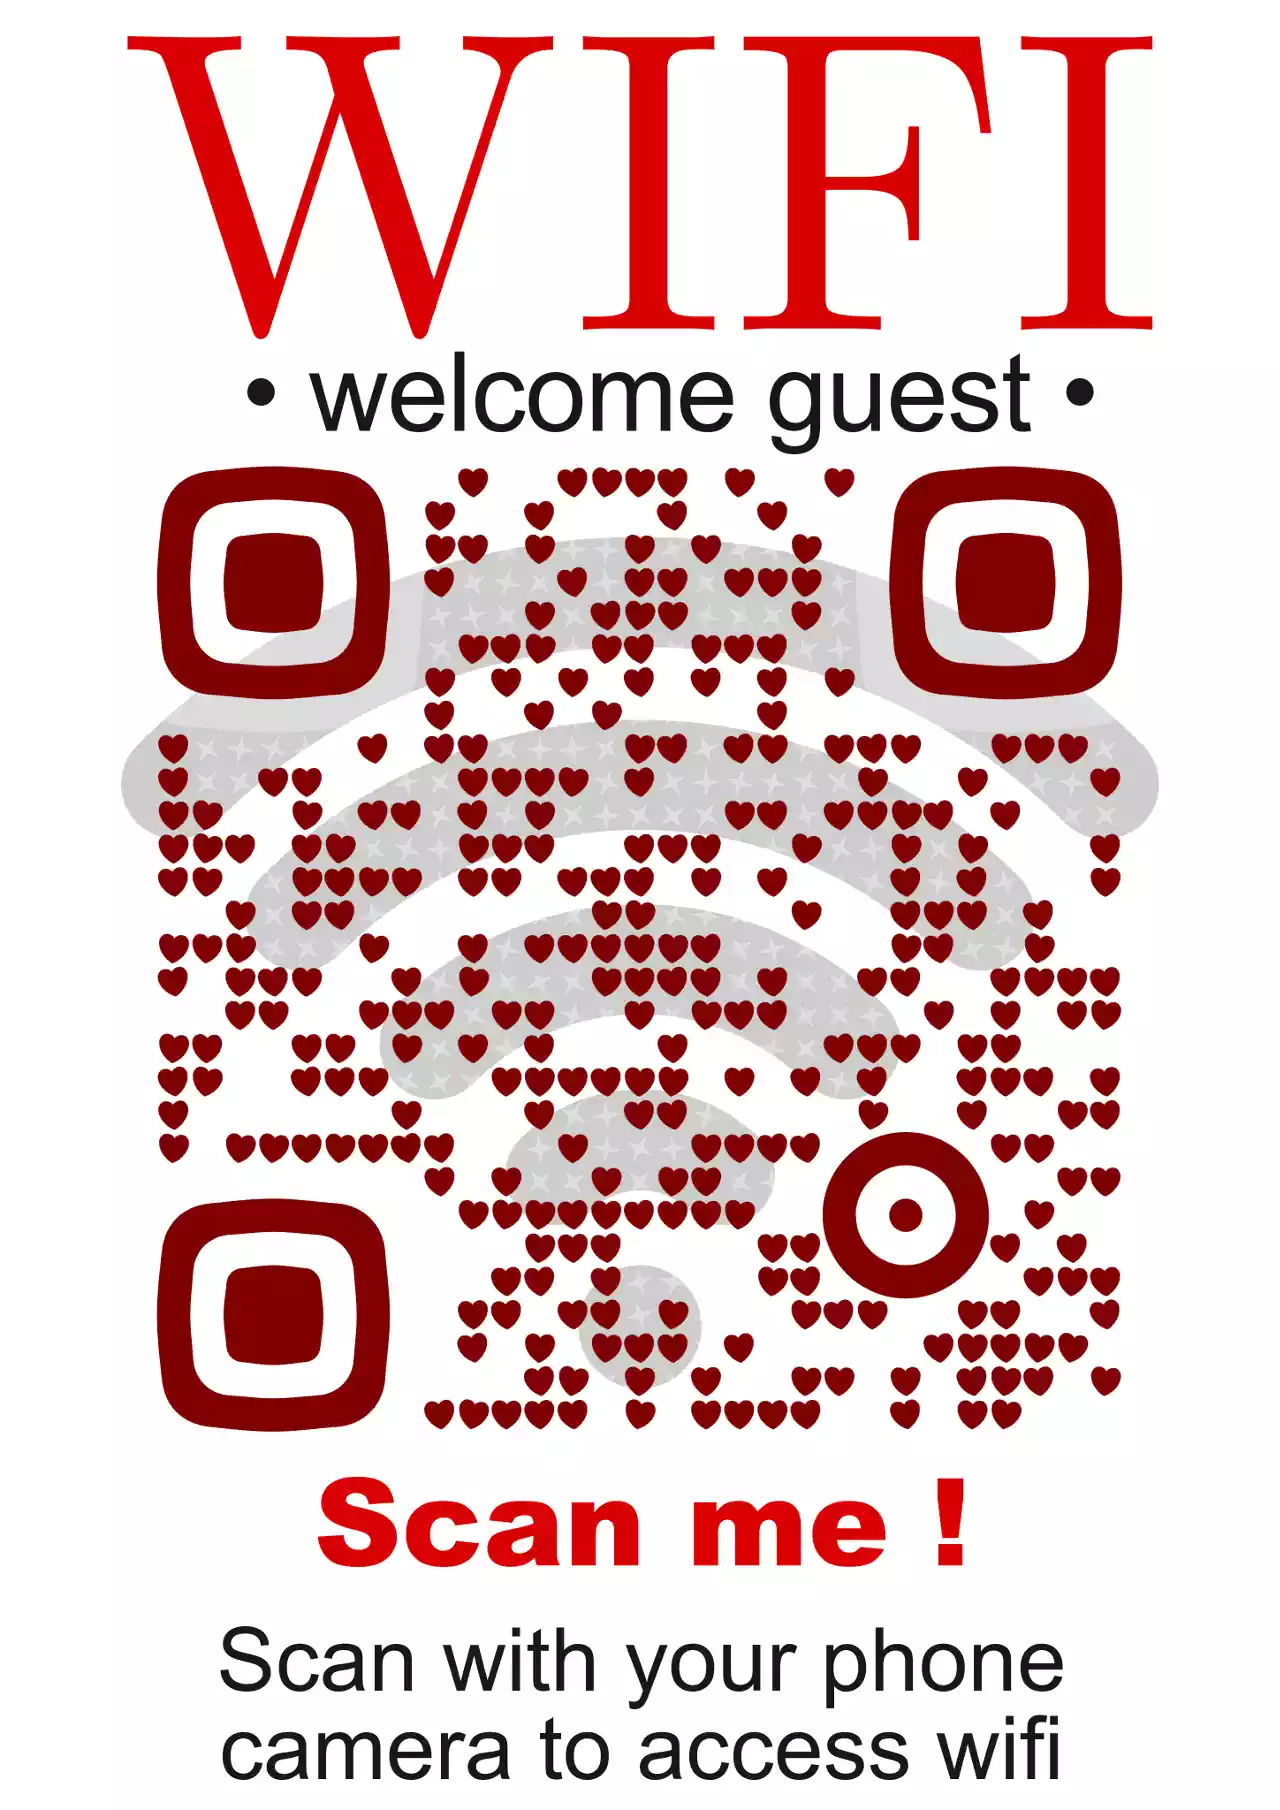 QrcodeLab online qr code generator - qr code image editor - touch free information wifi access